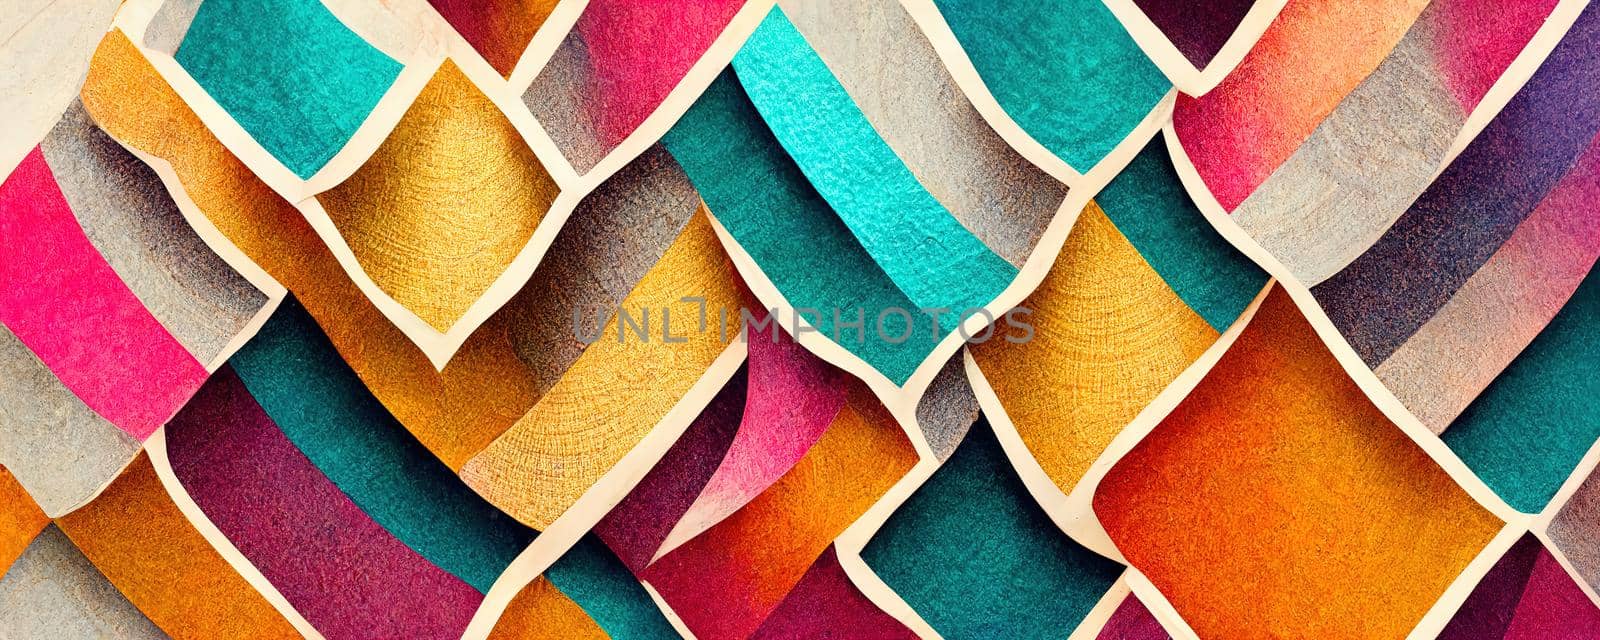 Abstract painting color texture. Modern futuristic pattern. Colorful background by TRMK